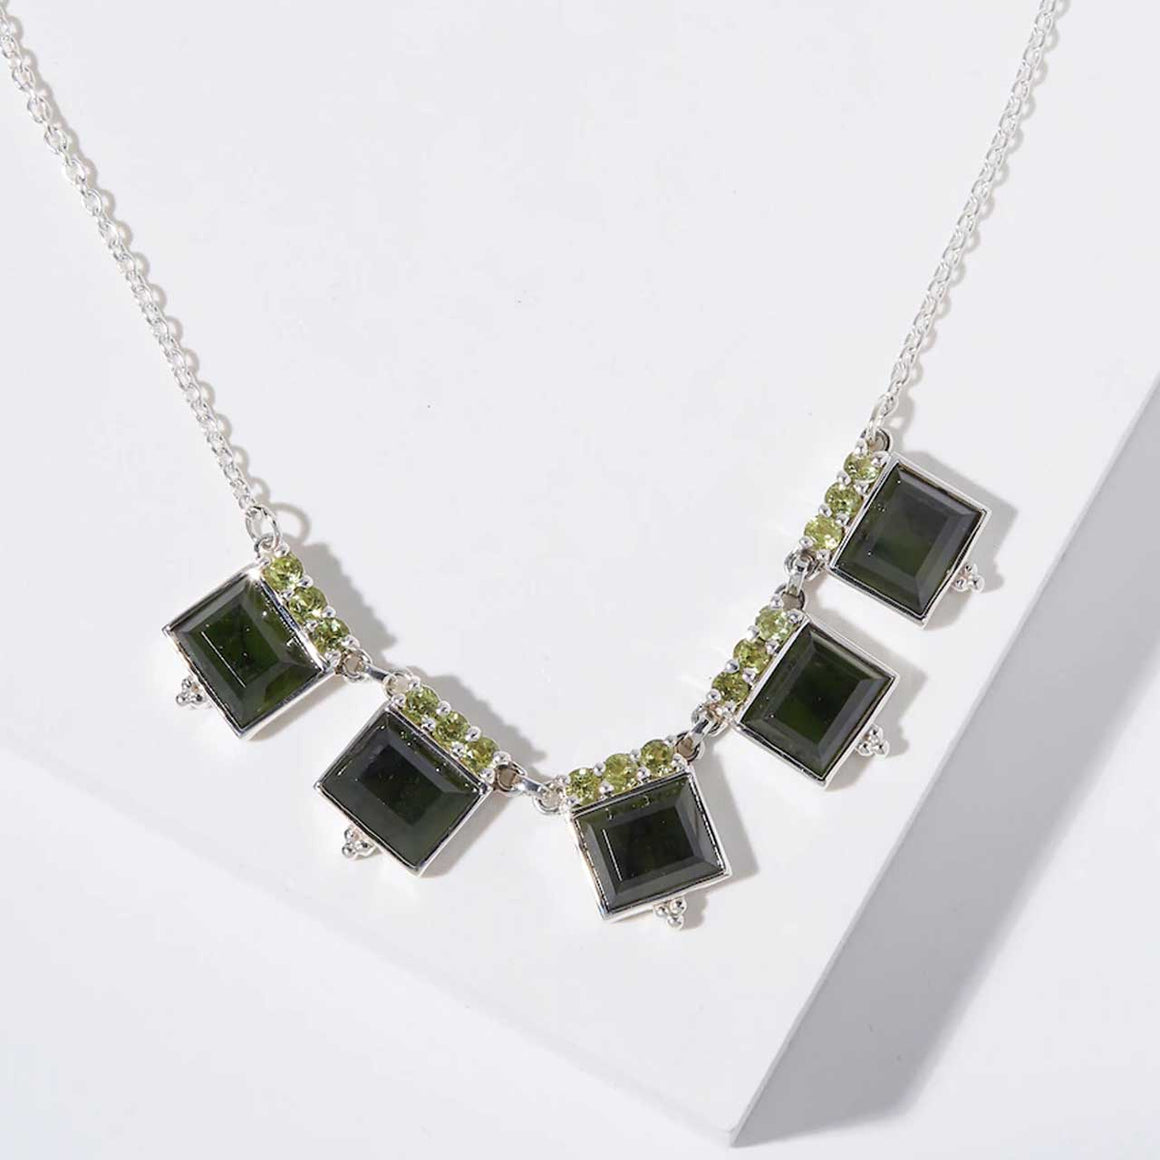 Faceted Nephrite Jade & Peridot Necklace